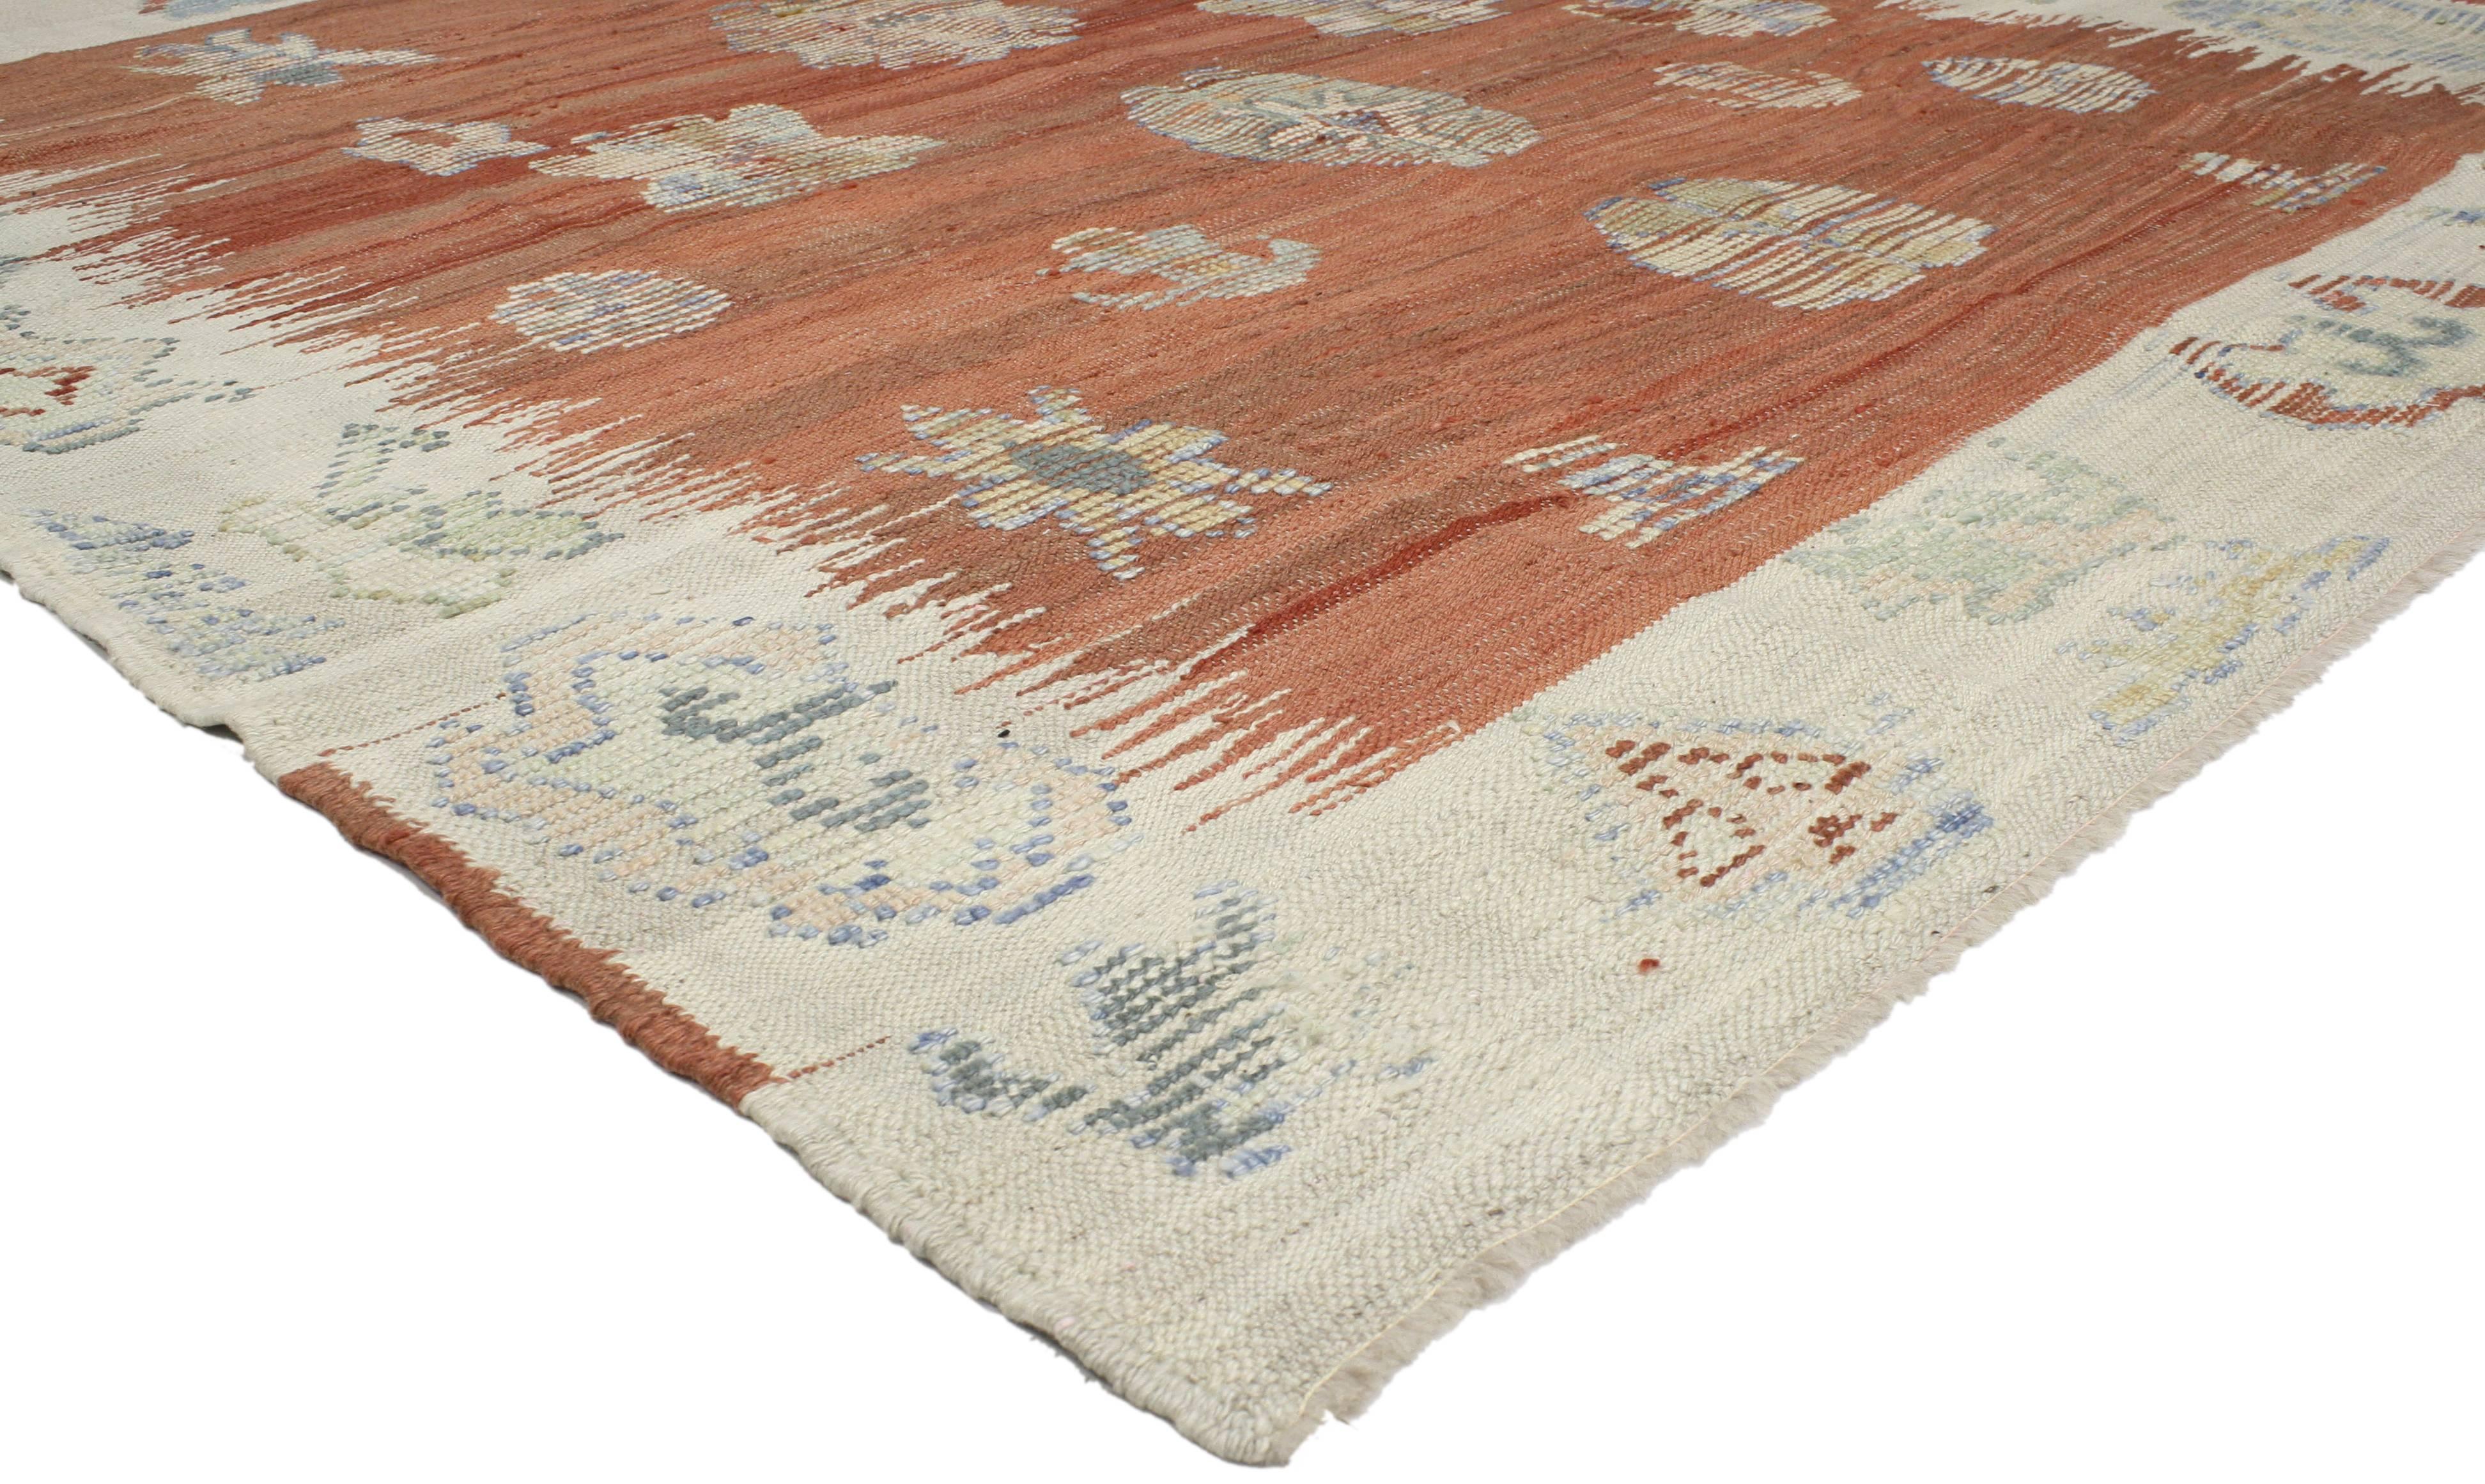 52208 Turkish Kilim rug with tribal style. Providing elements of wanderlust and functional versatility, this Turkish Kilim rug with tribal style features a diversity of symbolic Turkish motifs on an abrashed rustic umber field surrounded by a